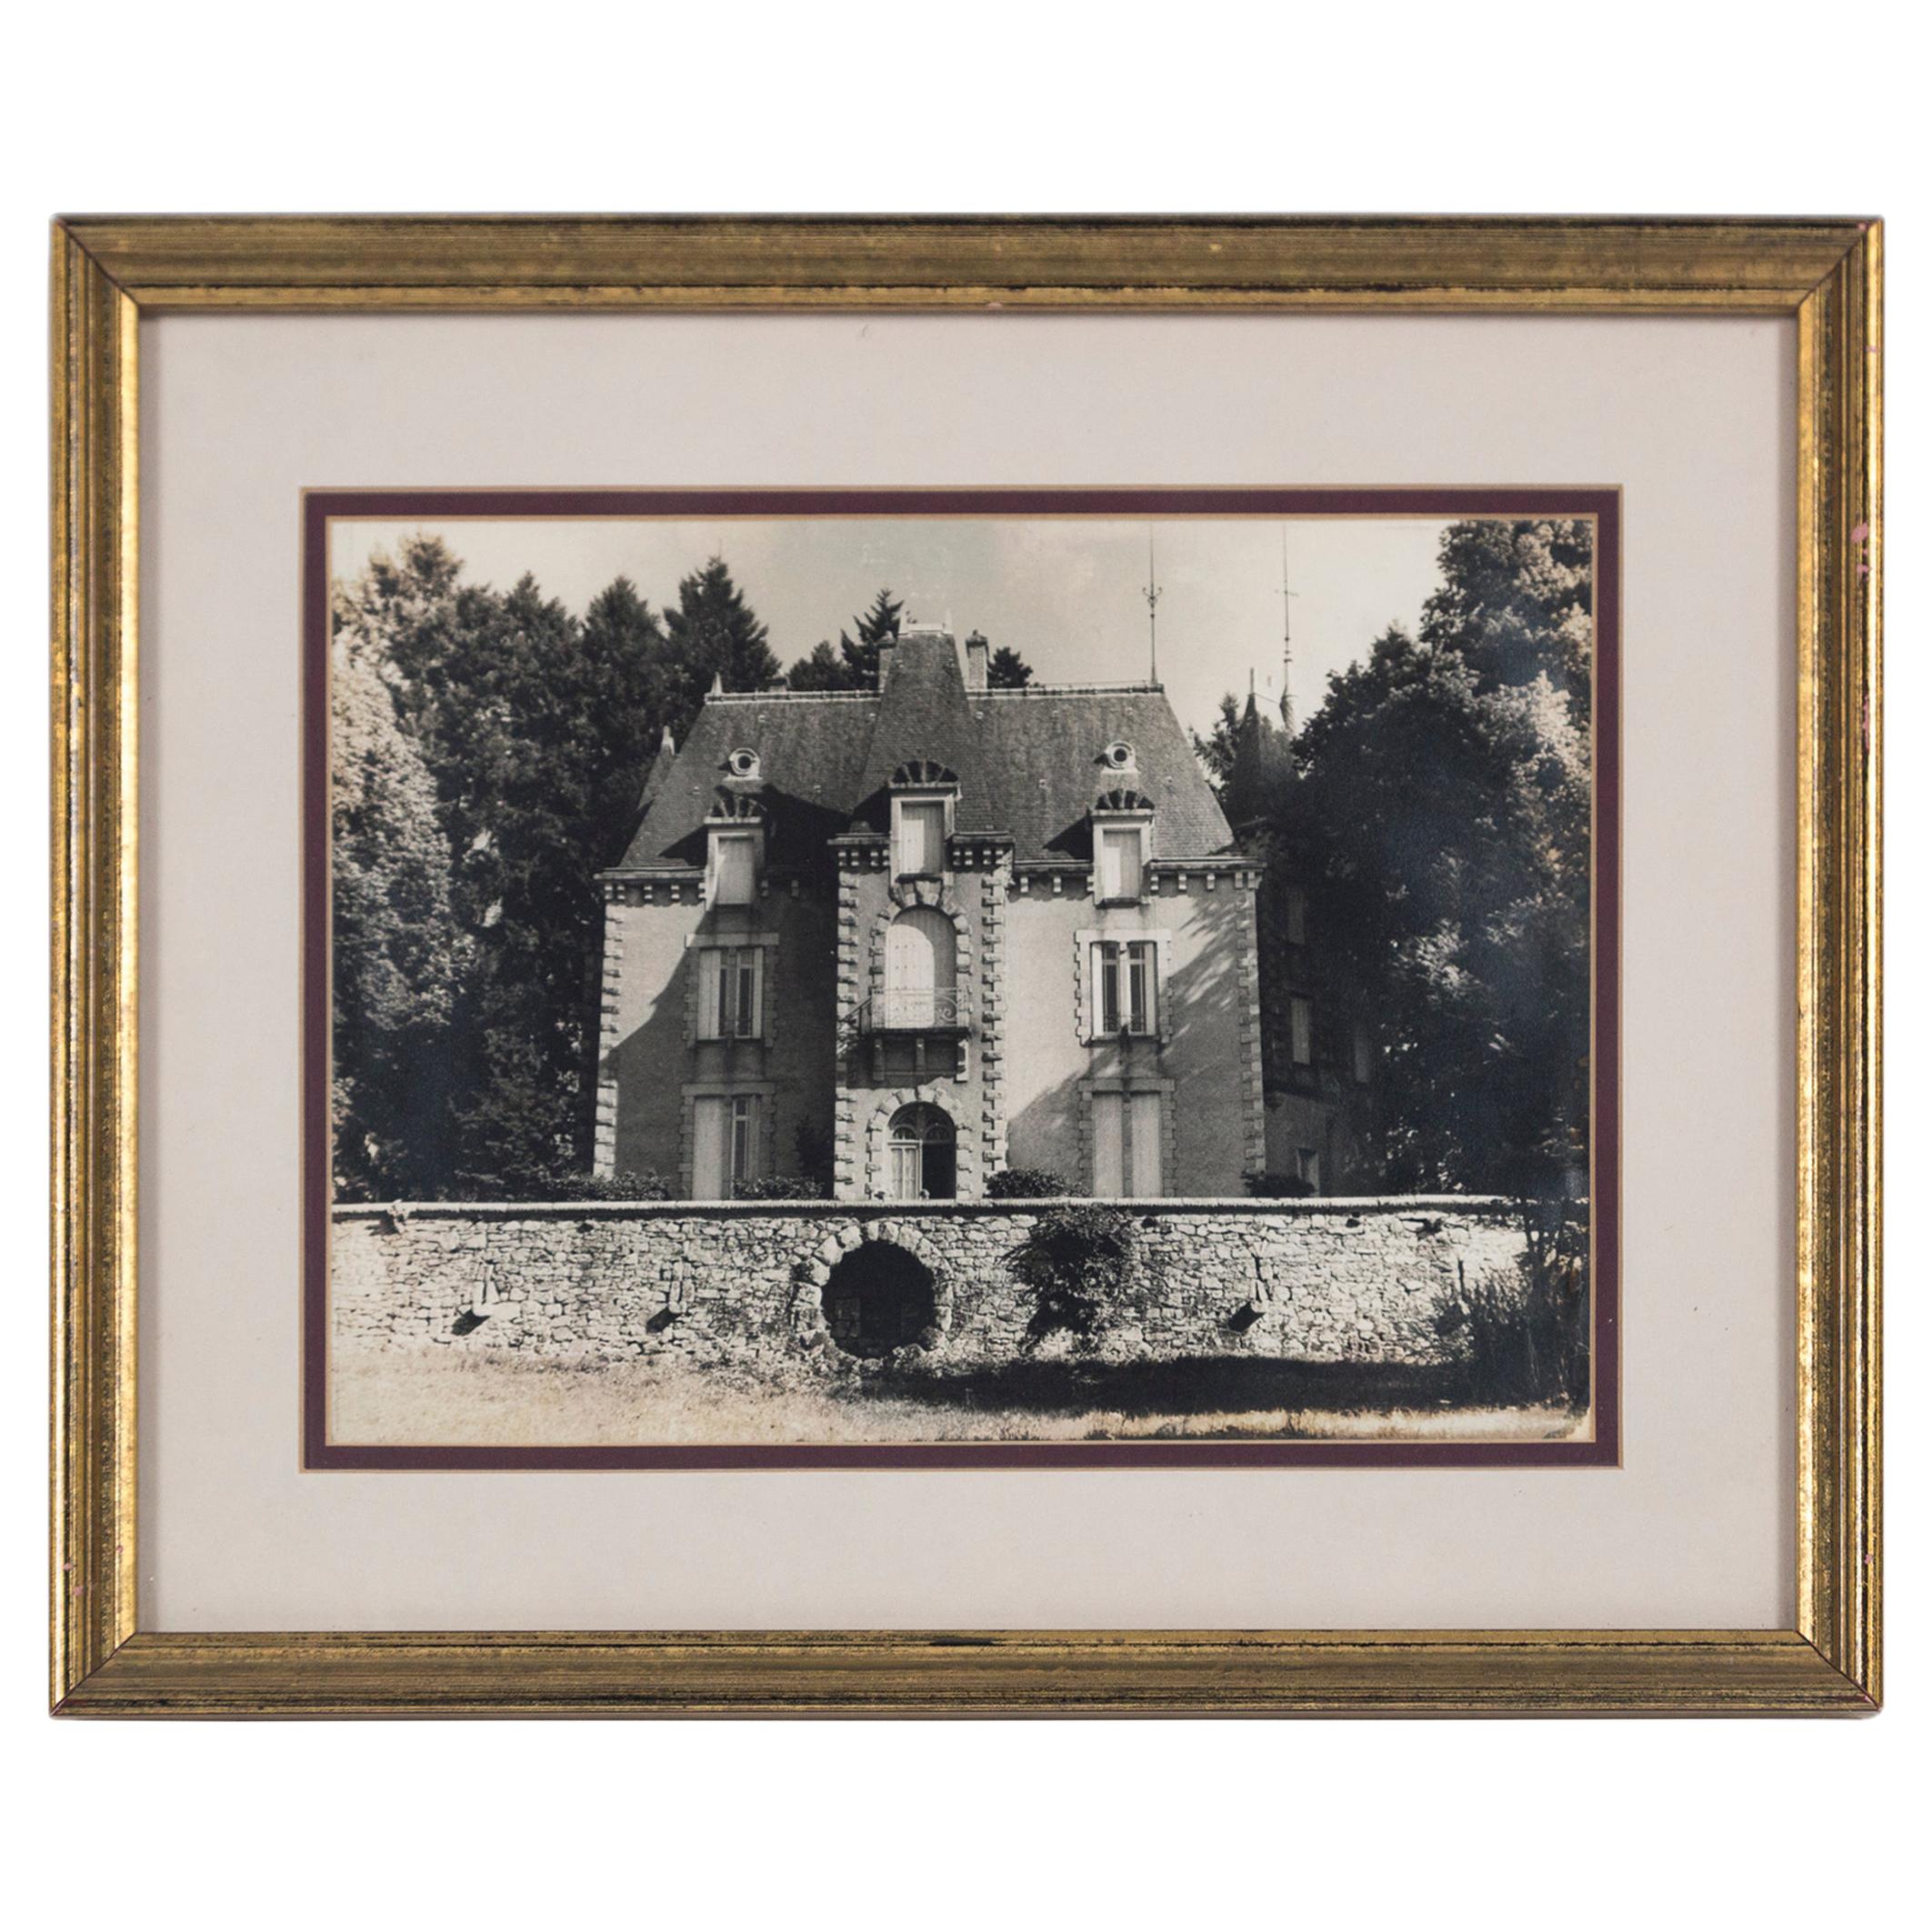 Vintage Framed Black and White Photograph, 'Le Chateau', France, circa 1950's